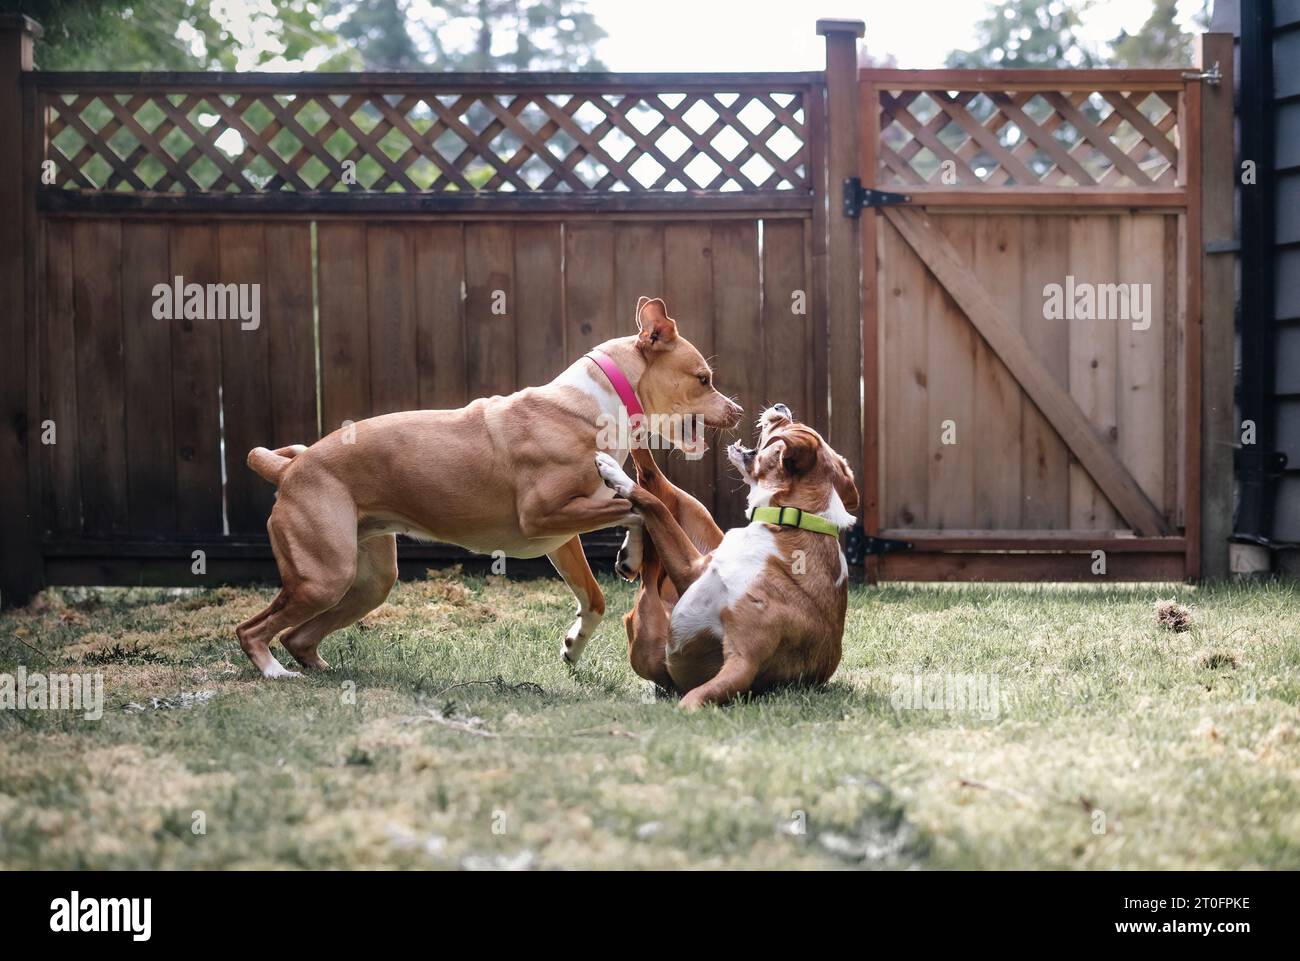 Two dogs playing rough in backyard. Young dogs play fighting with open mouth and teeth. Aggressive behavior or dominance. 1 year old dog friends. Boxe Stock Photo